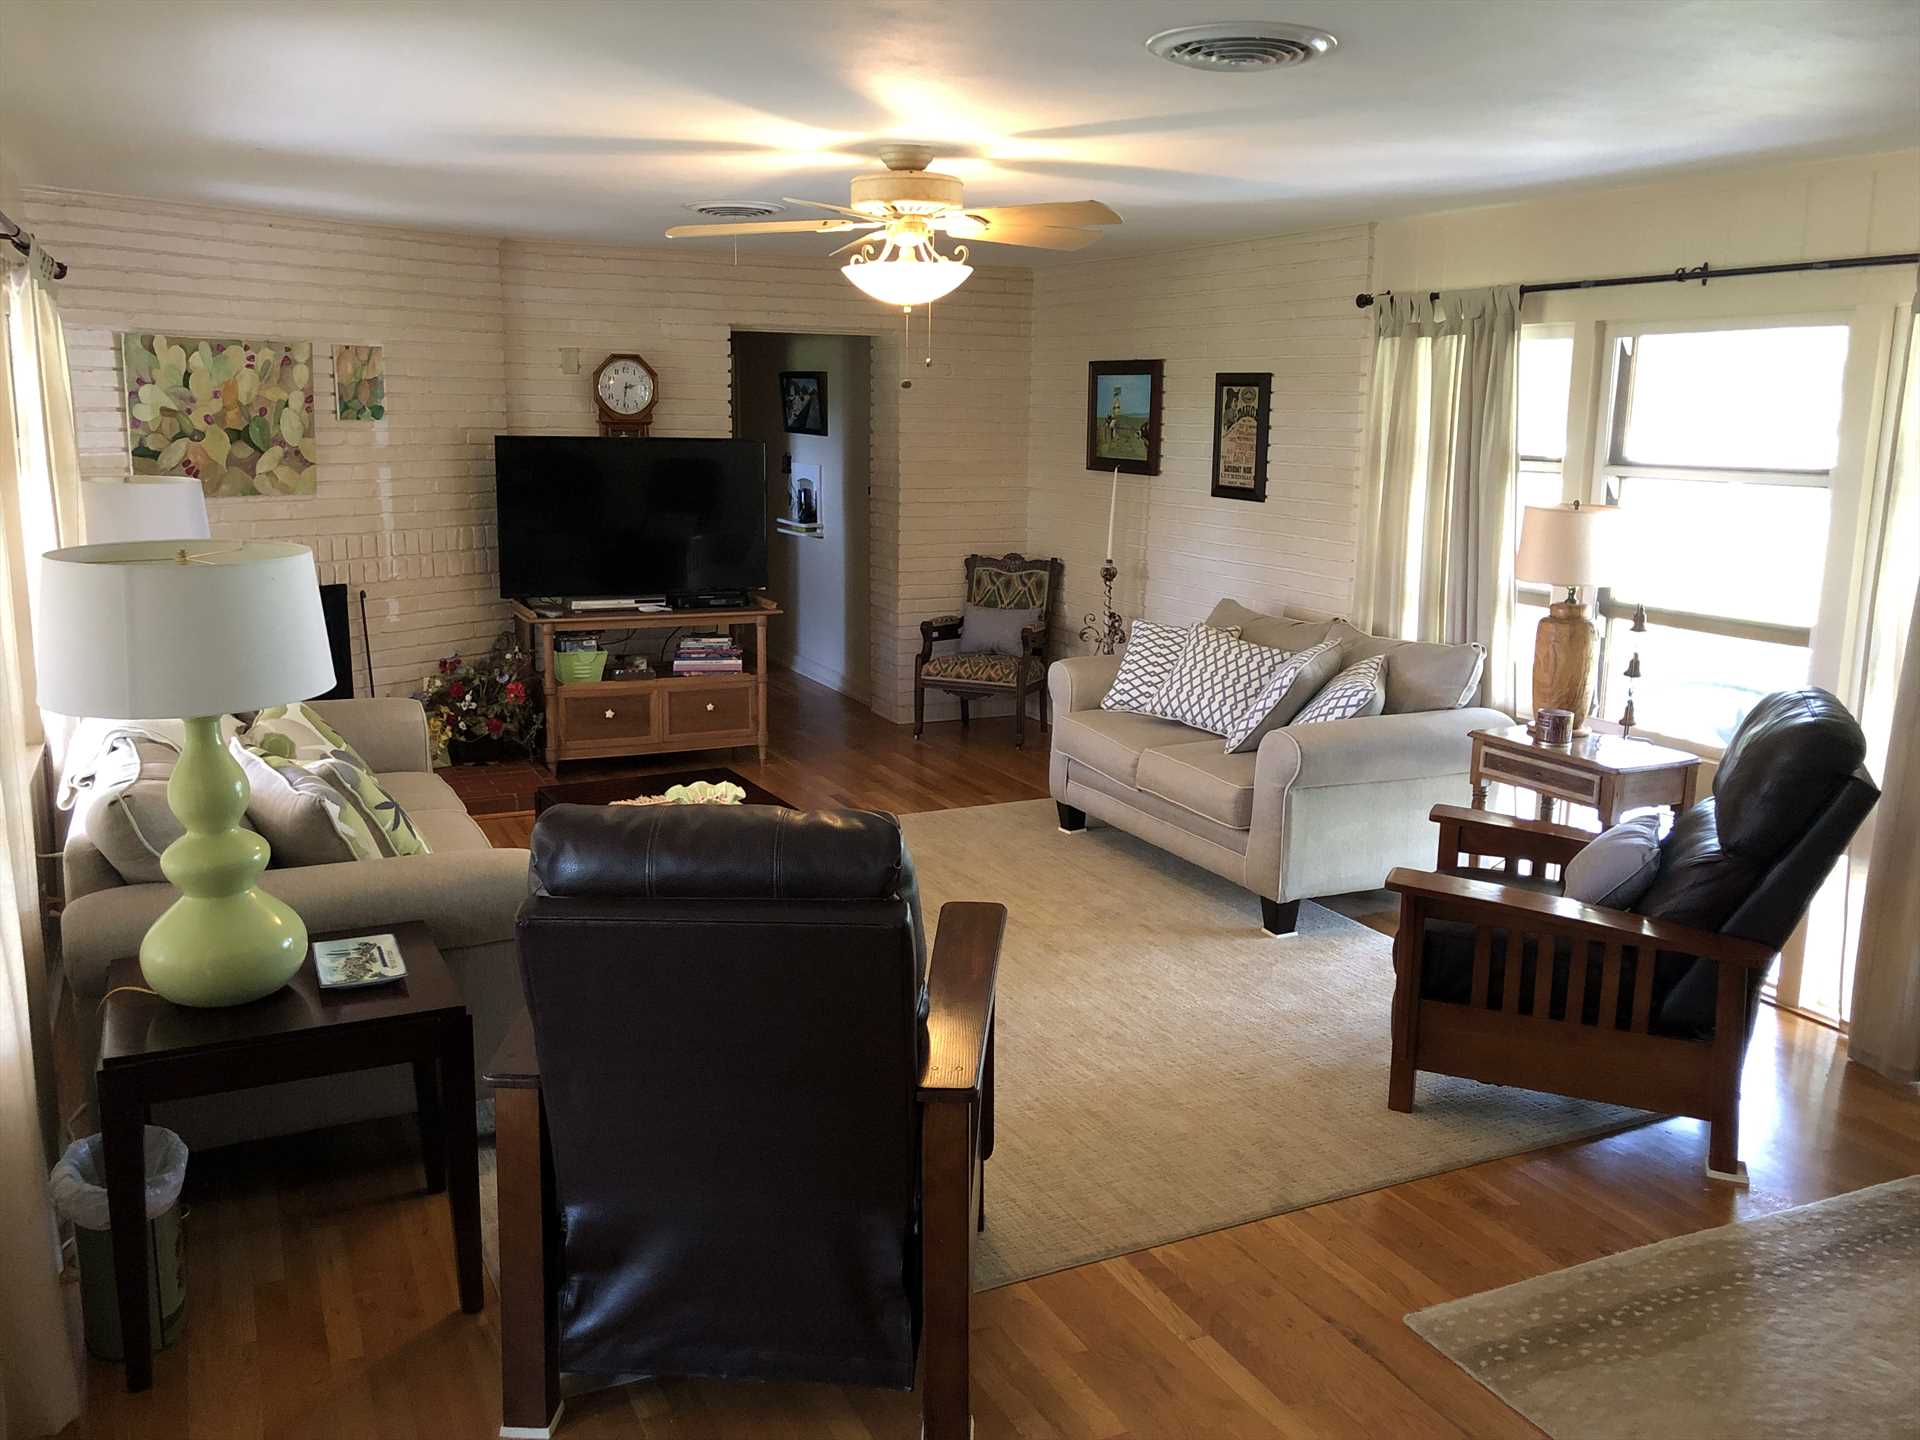                                                 Central air and heat, along with adjustable ceiling fans, make this beautifully furnished rental a comfortable Hill Country escape year round.